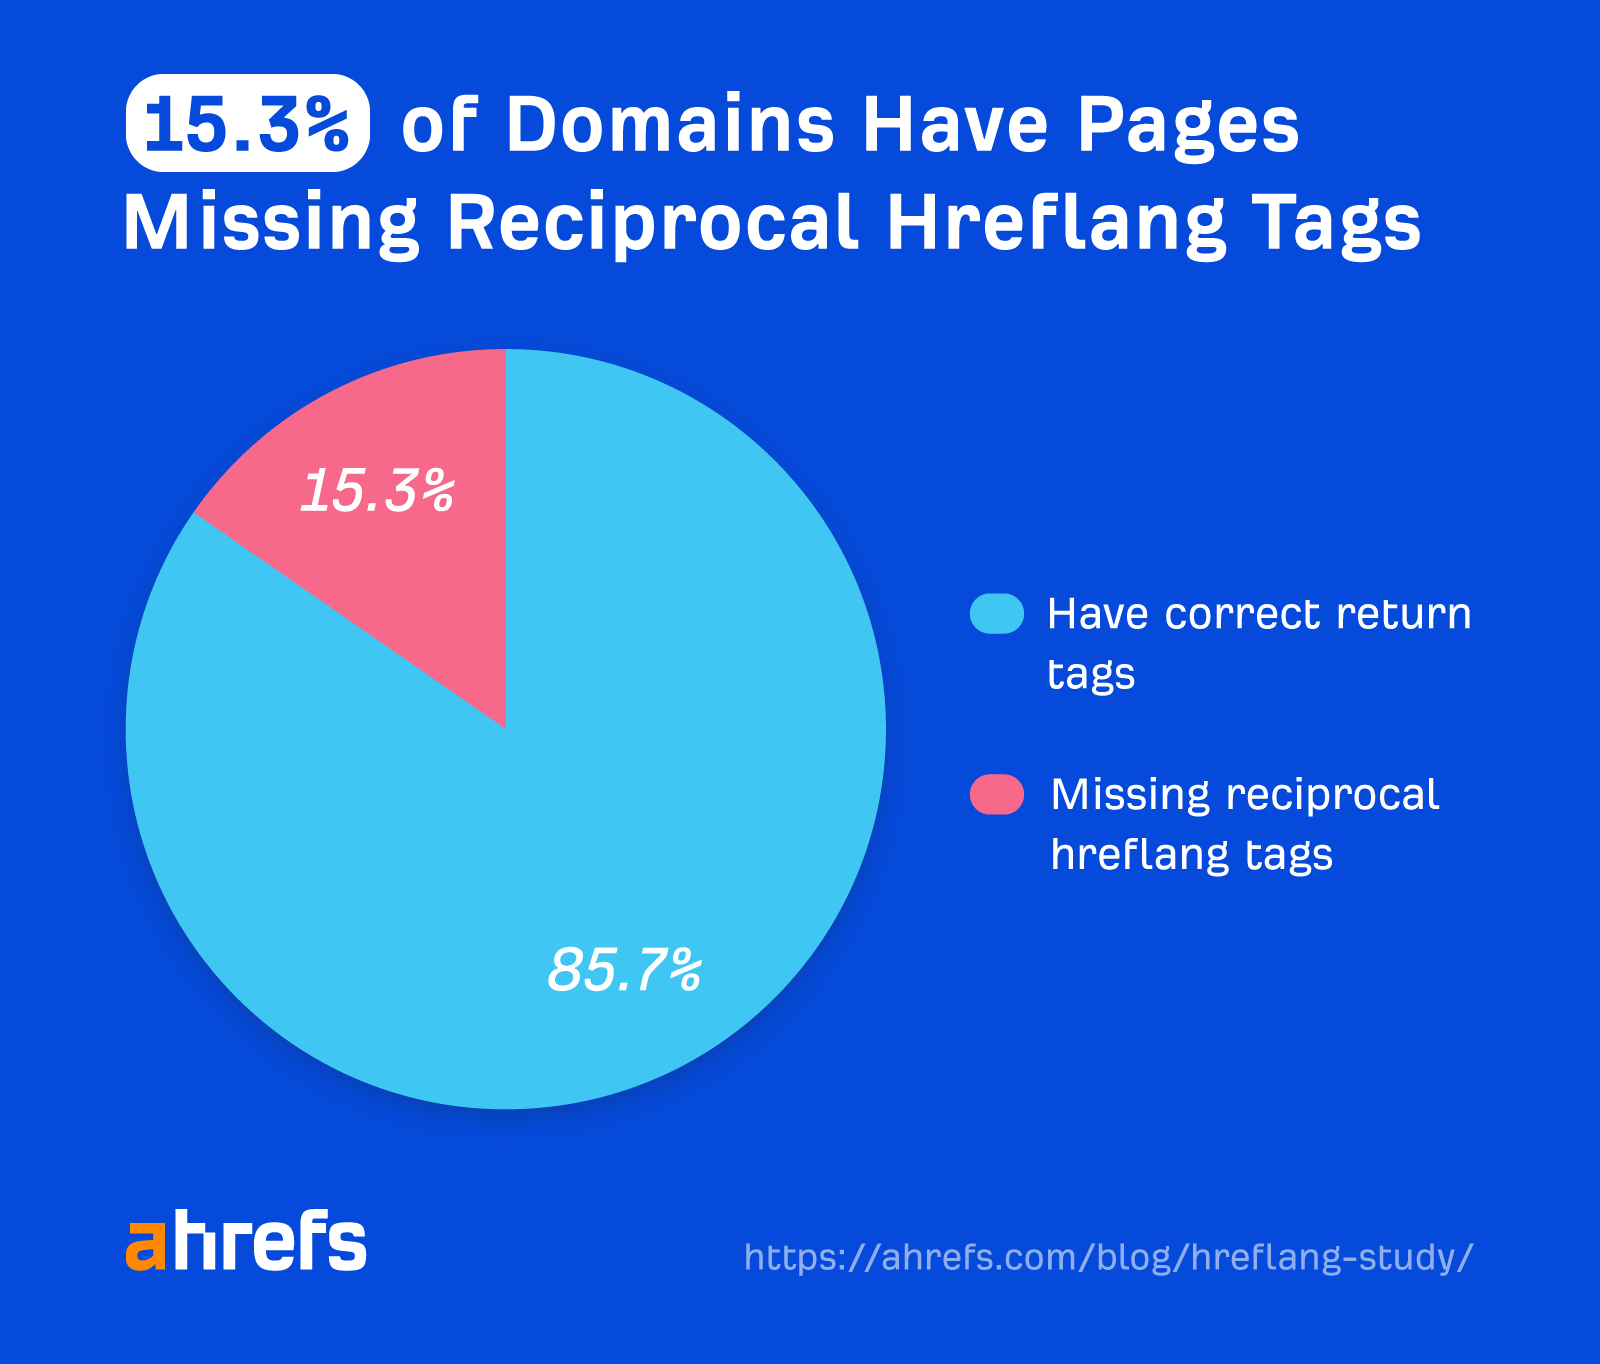 15.3% of domains have pages missing reciprocal hreflang tags